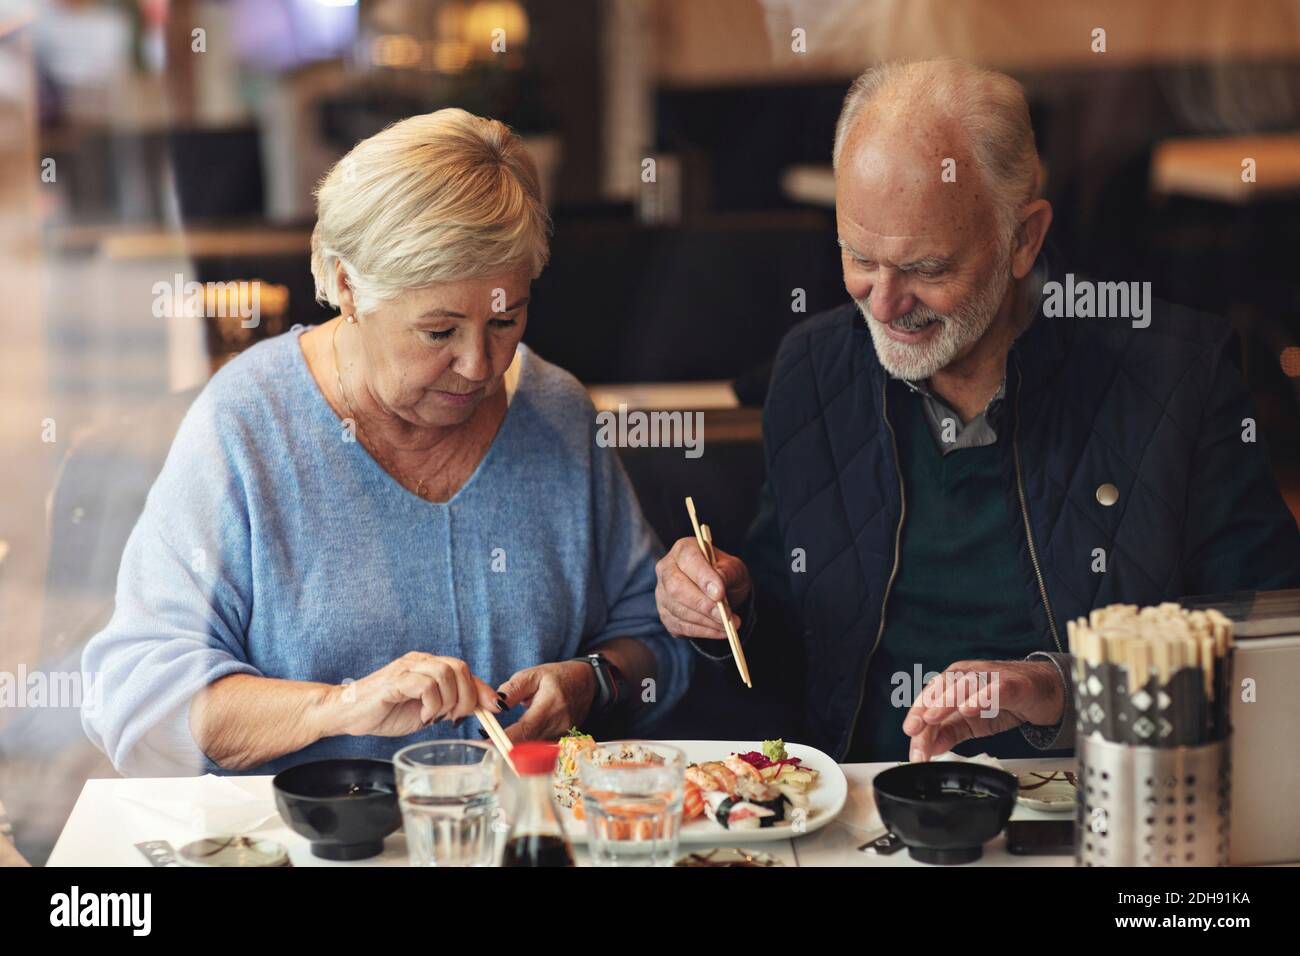 Senior couple eating food while sitting in restaurant Stock Photo